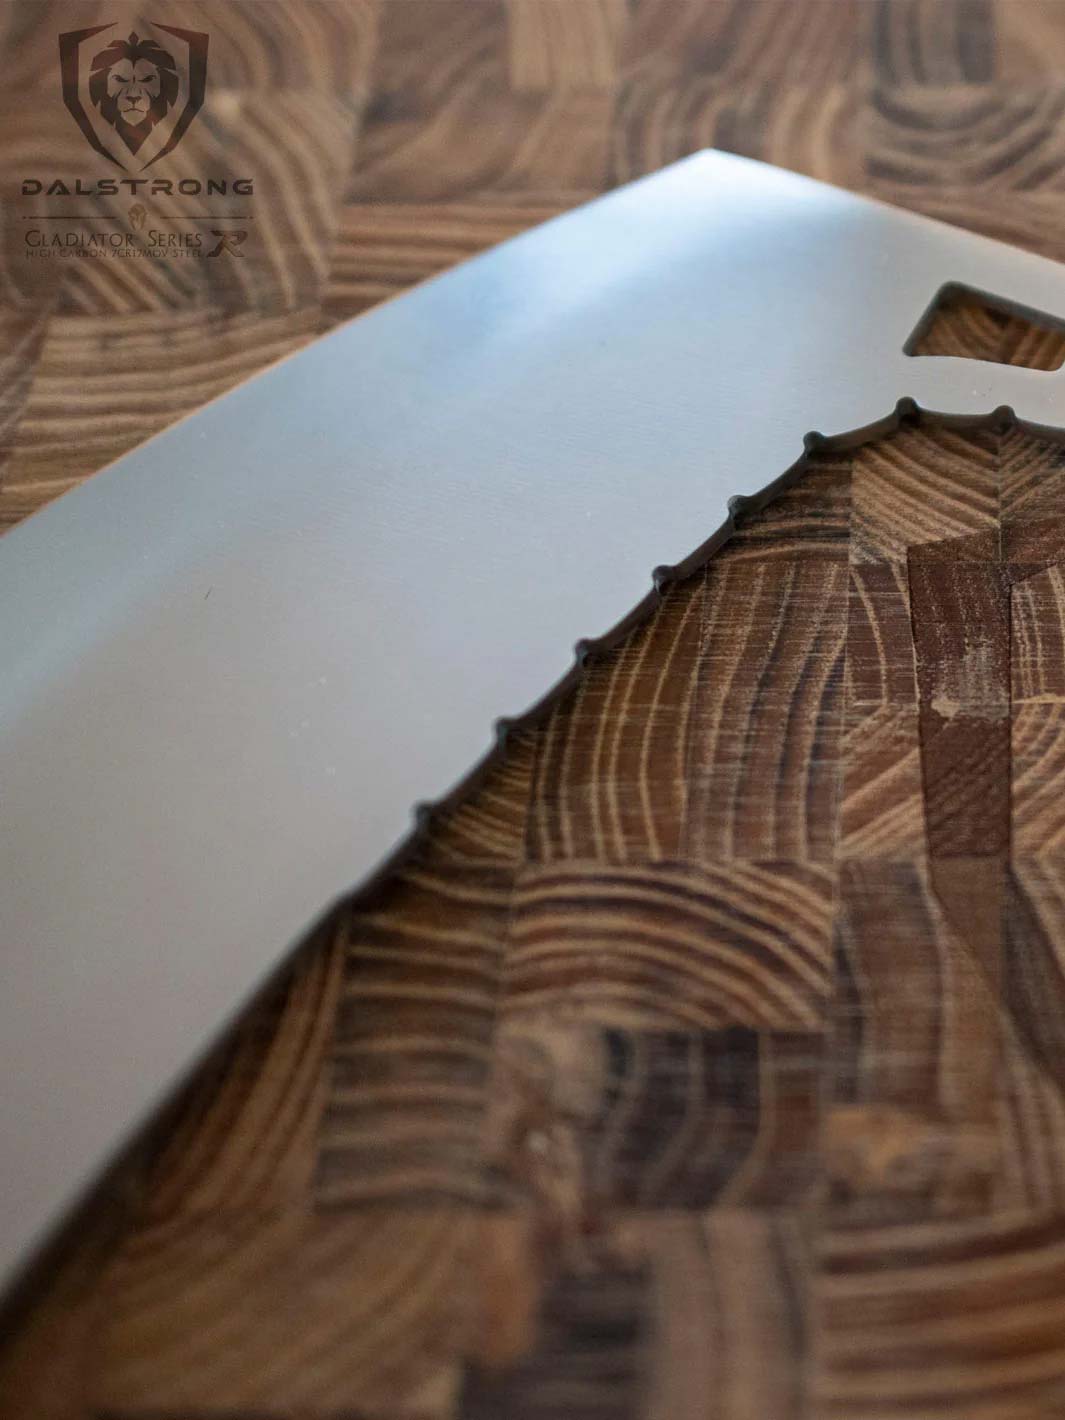 Dalstrong gladiator series 12 inch rocking cleaver knife on a cutting board.